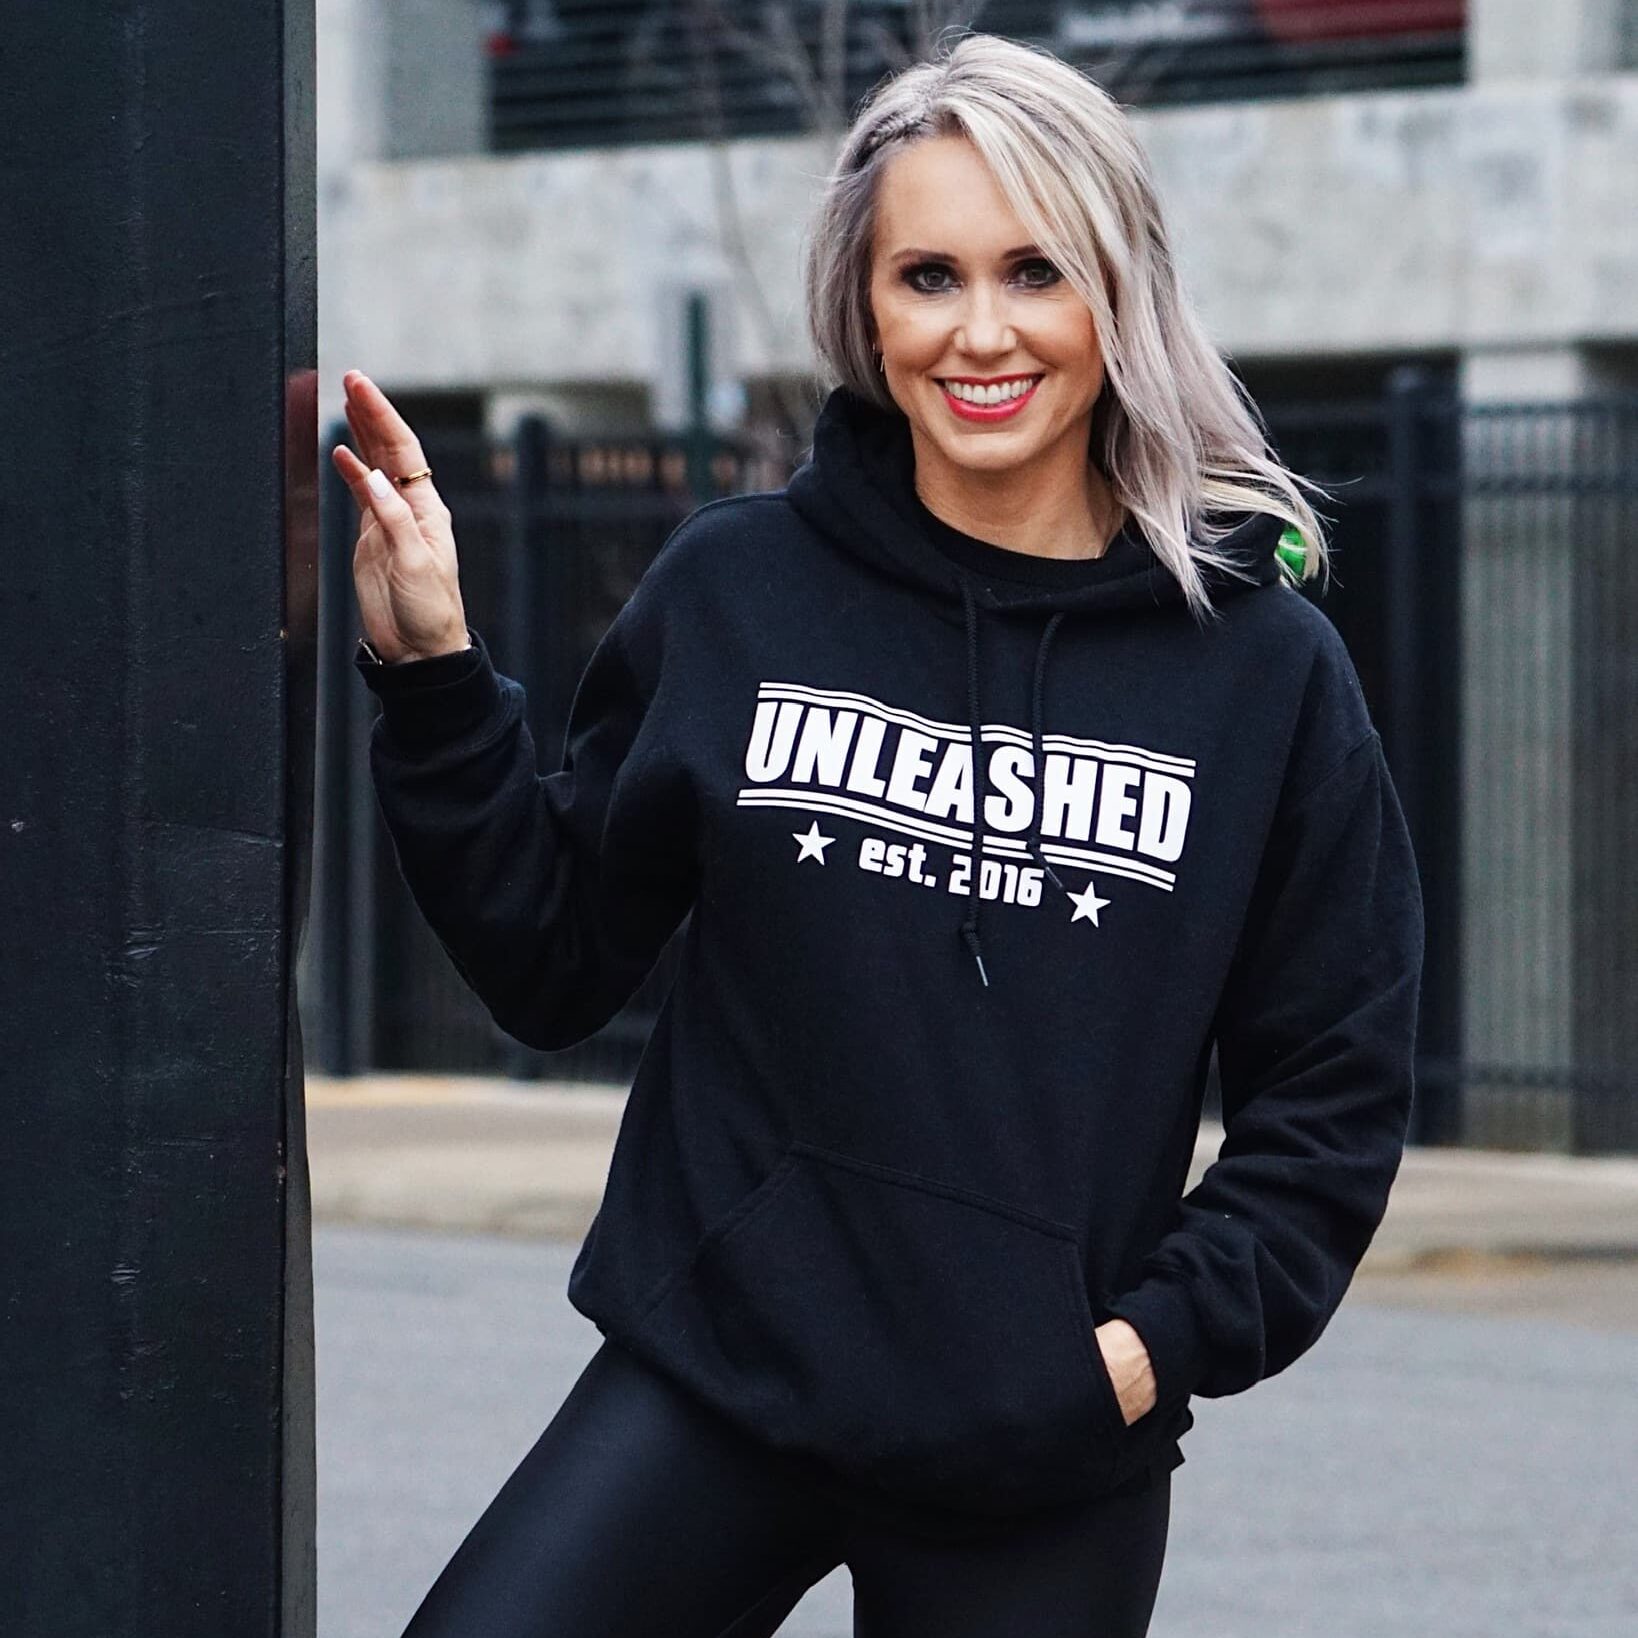 An Unleashed Health and Fitness branded black hoodie.